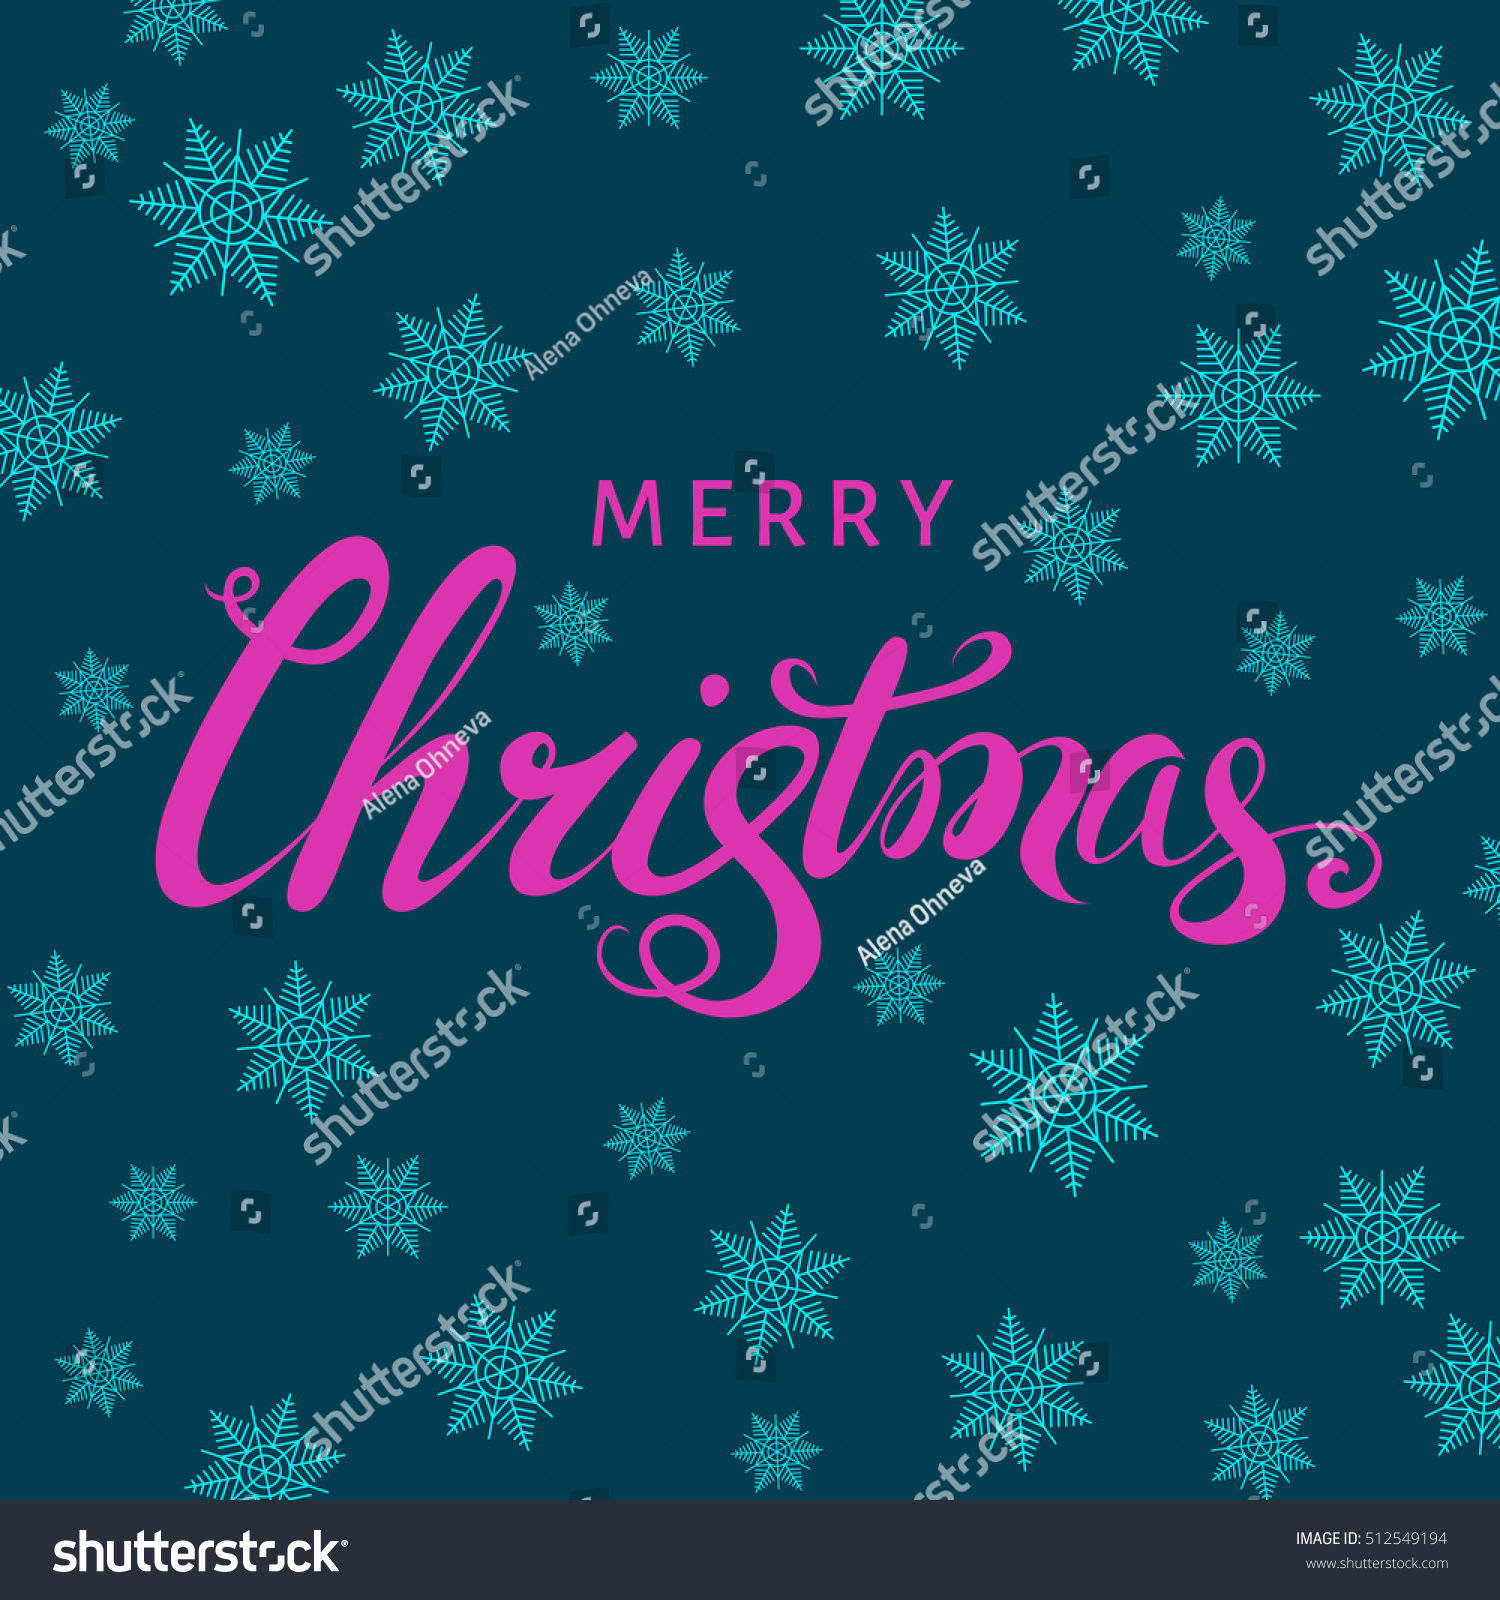 Merry Christmas Pink Hand Lettering With Snowflakes On Blue Background. Vector Greeting Card